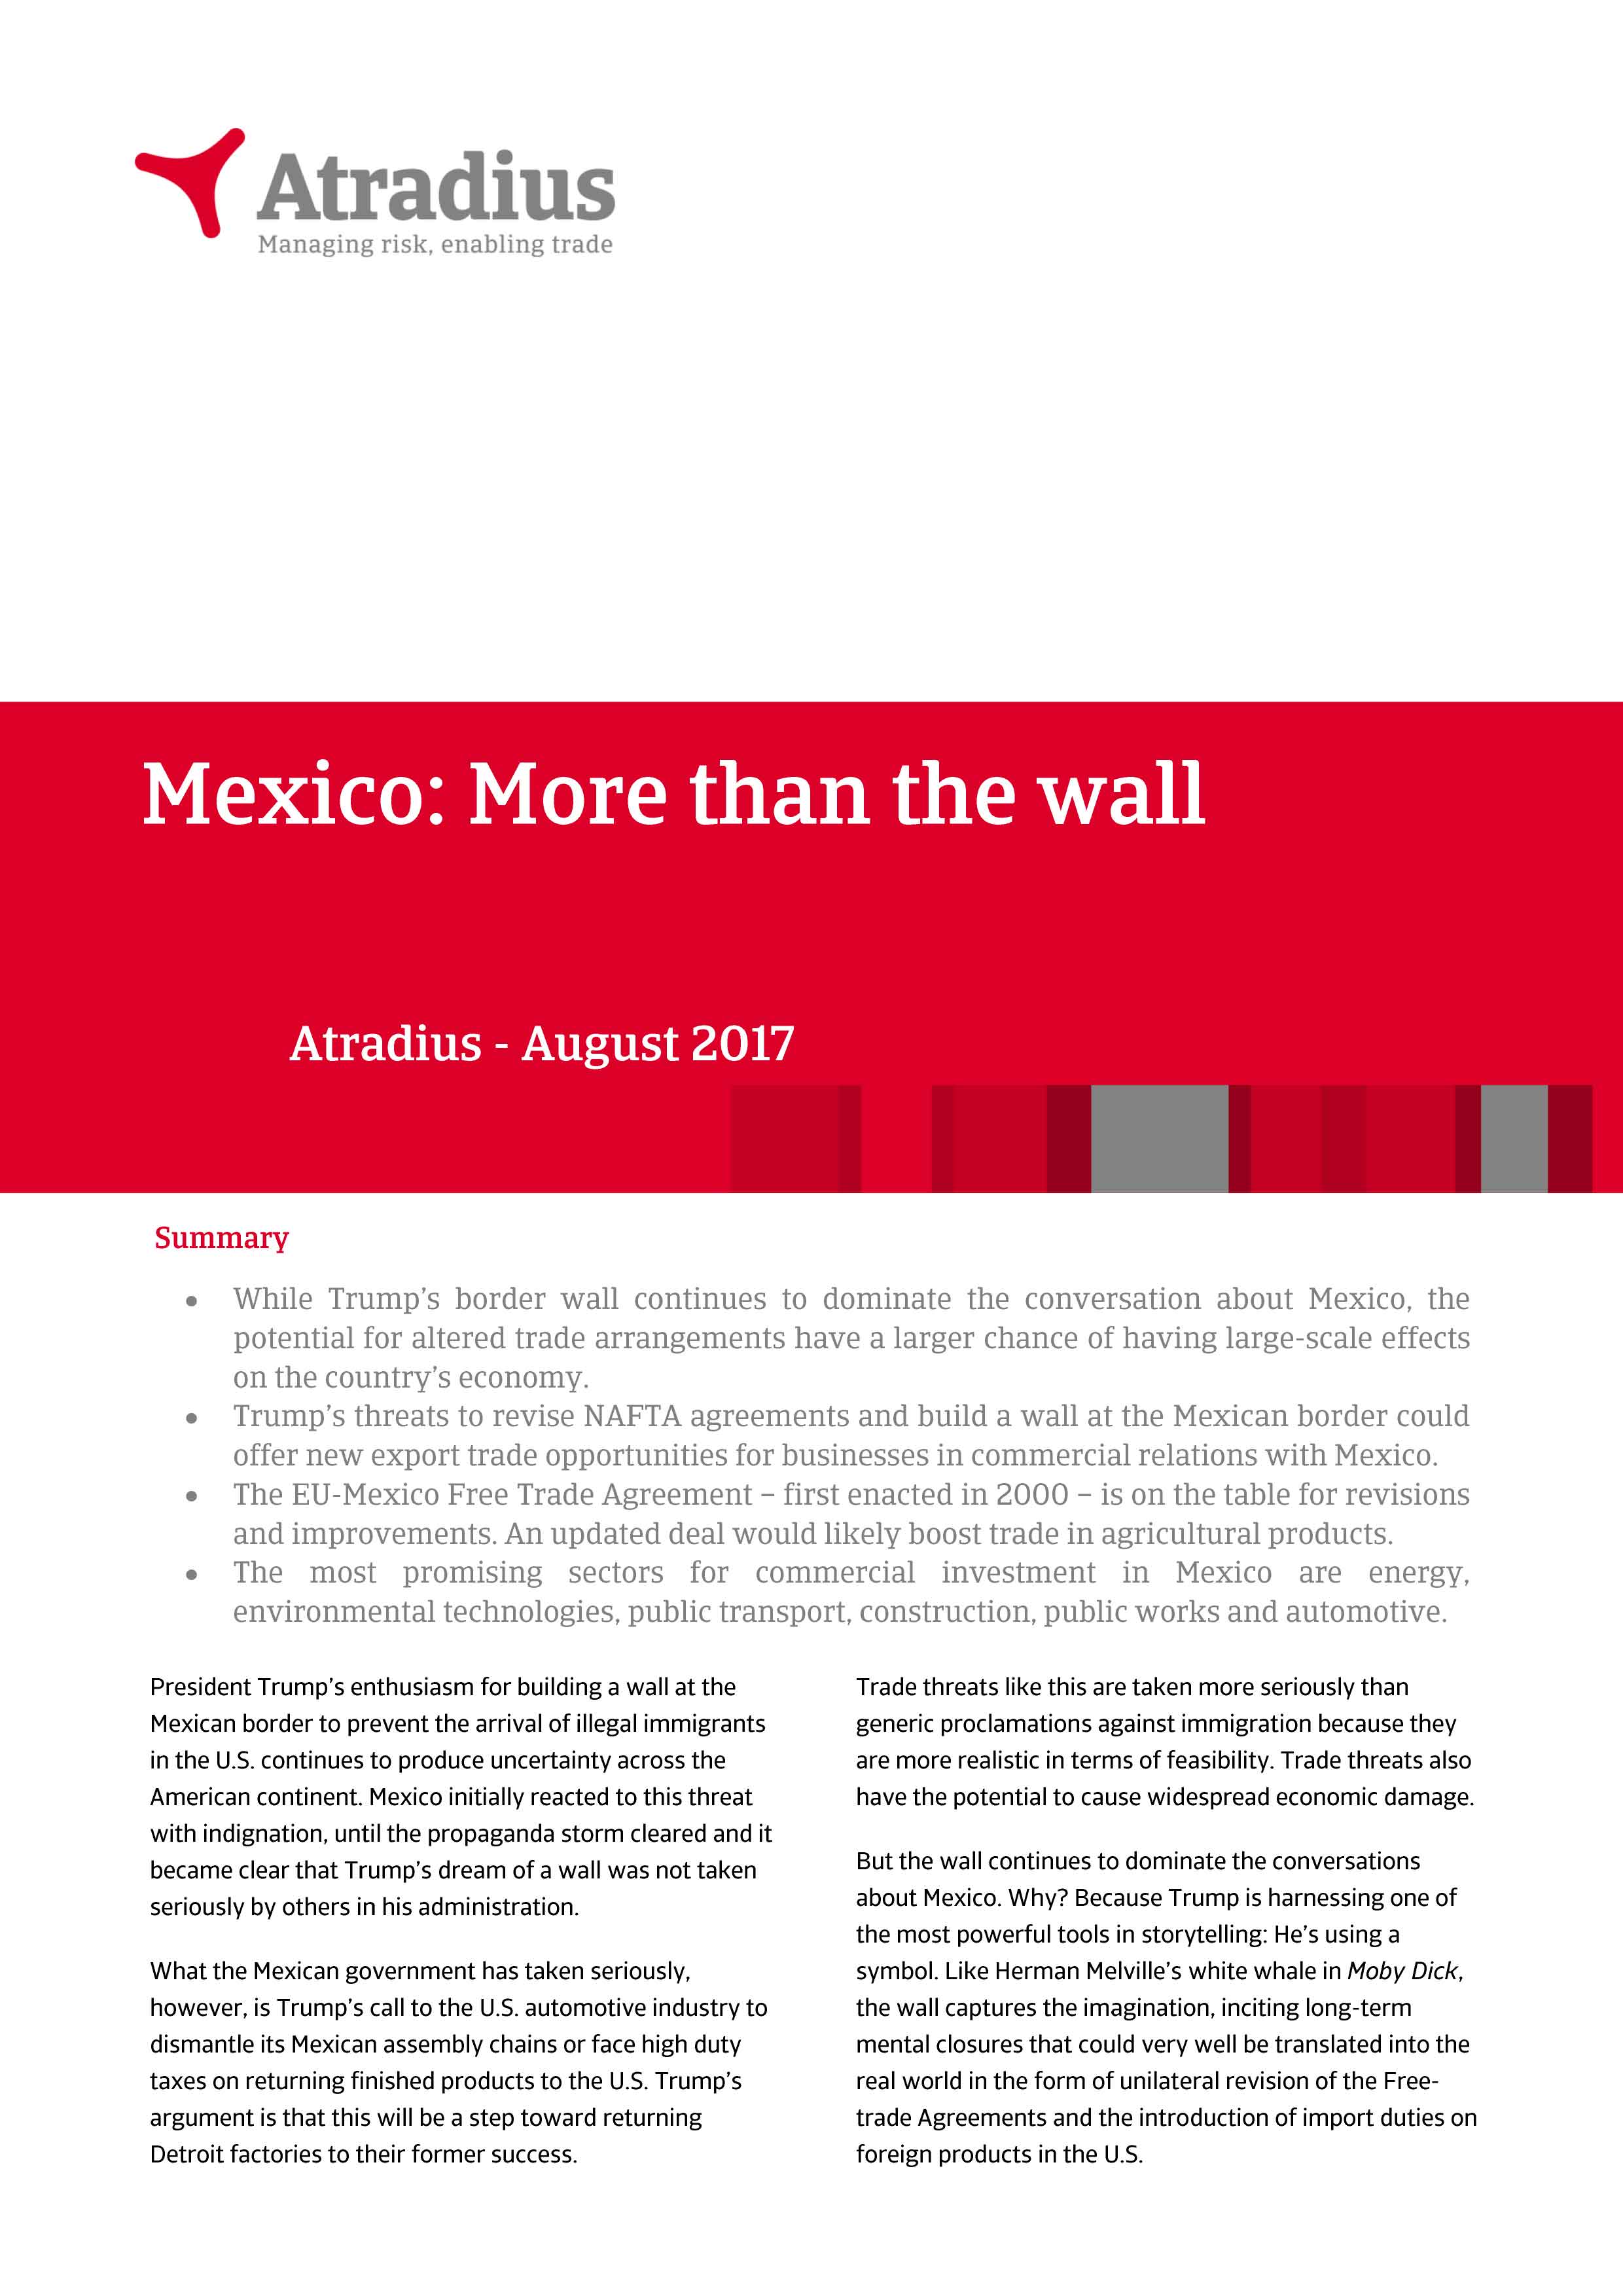 Mexico: More than the wall